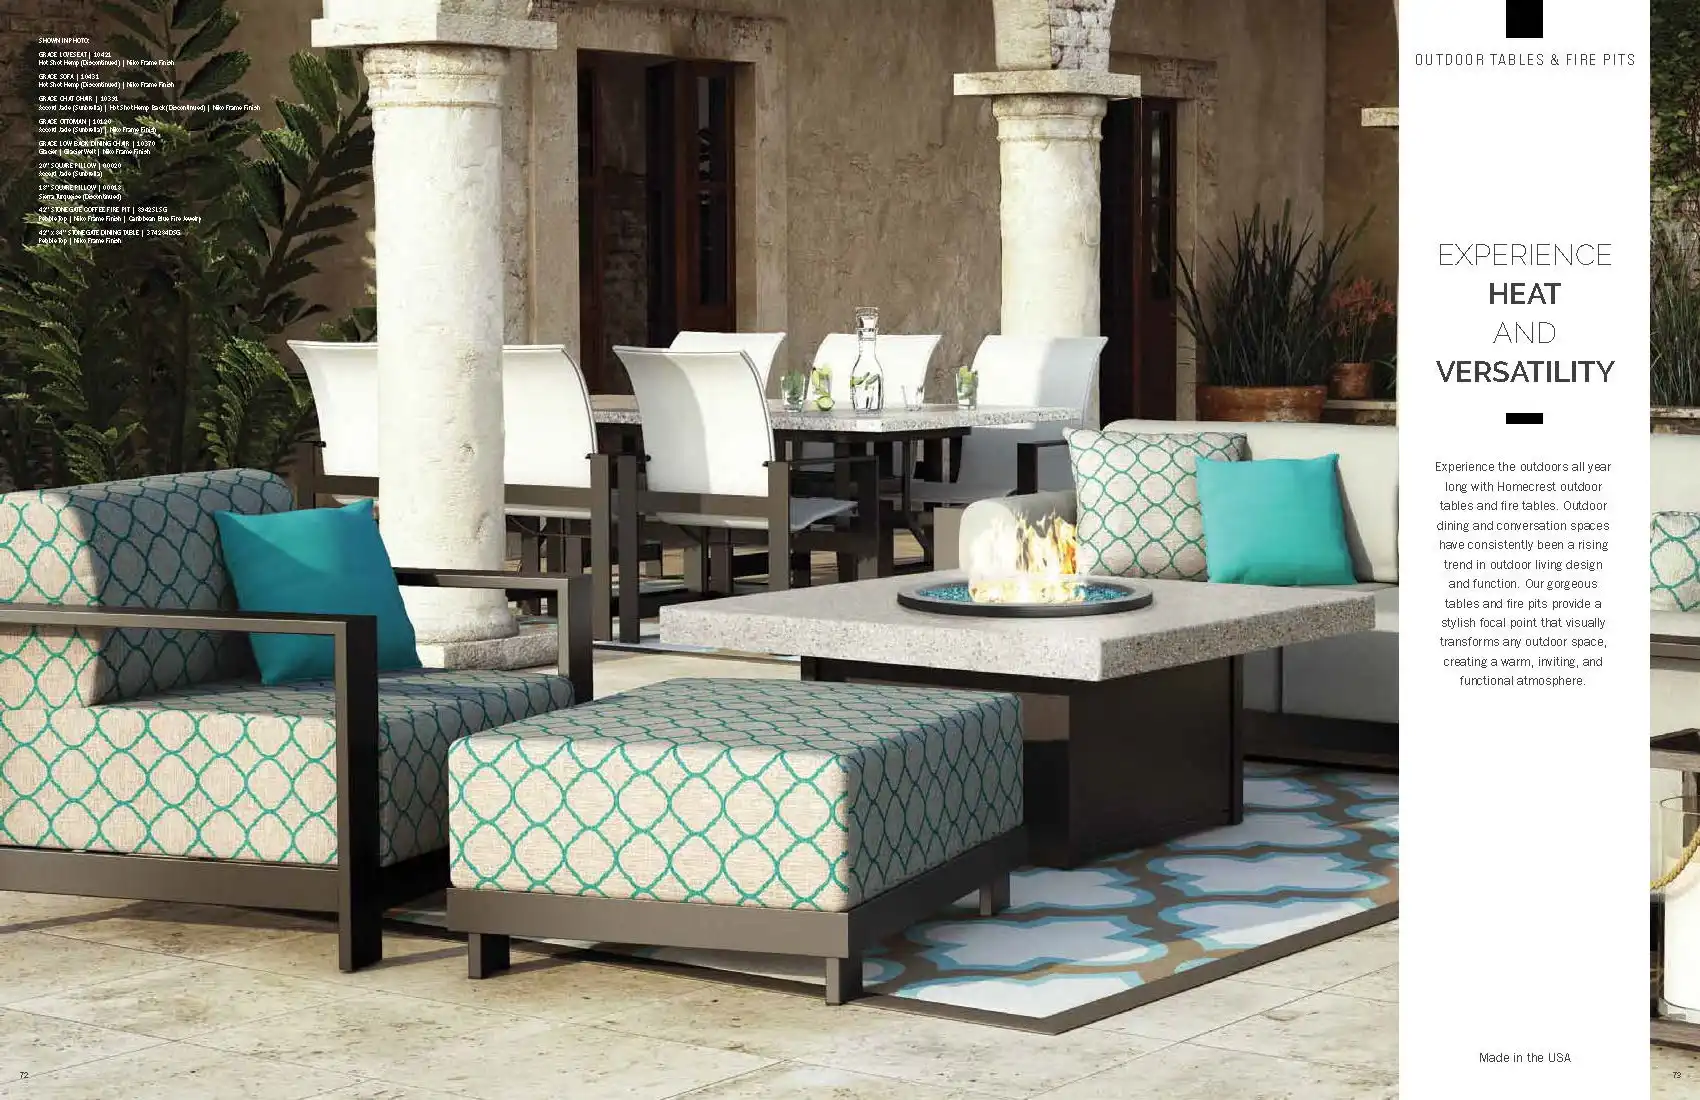 Outdoor Tables & Firepits (Aluminum) by Homecrest